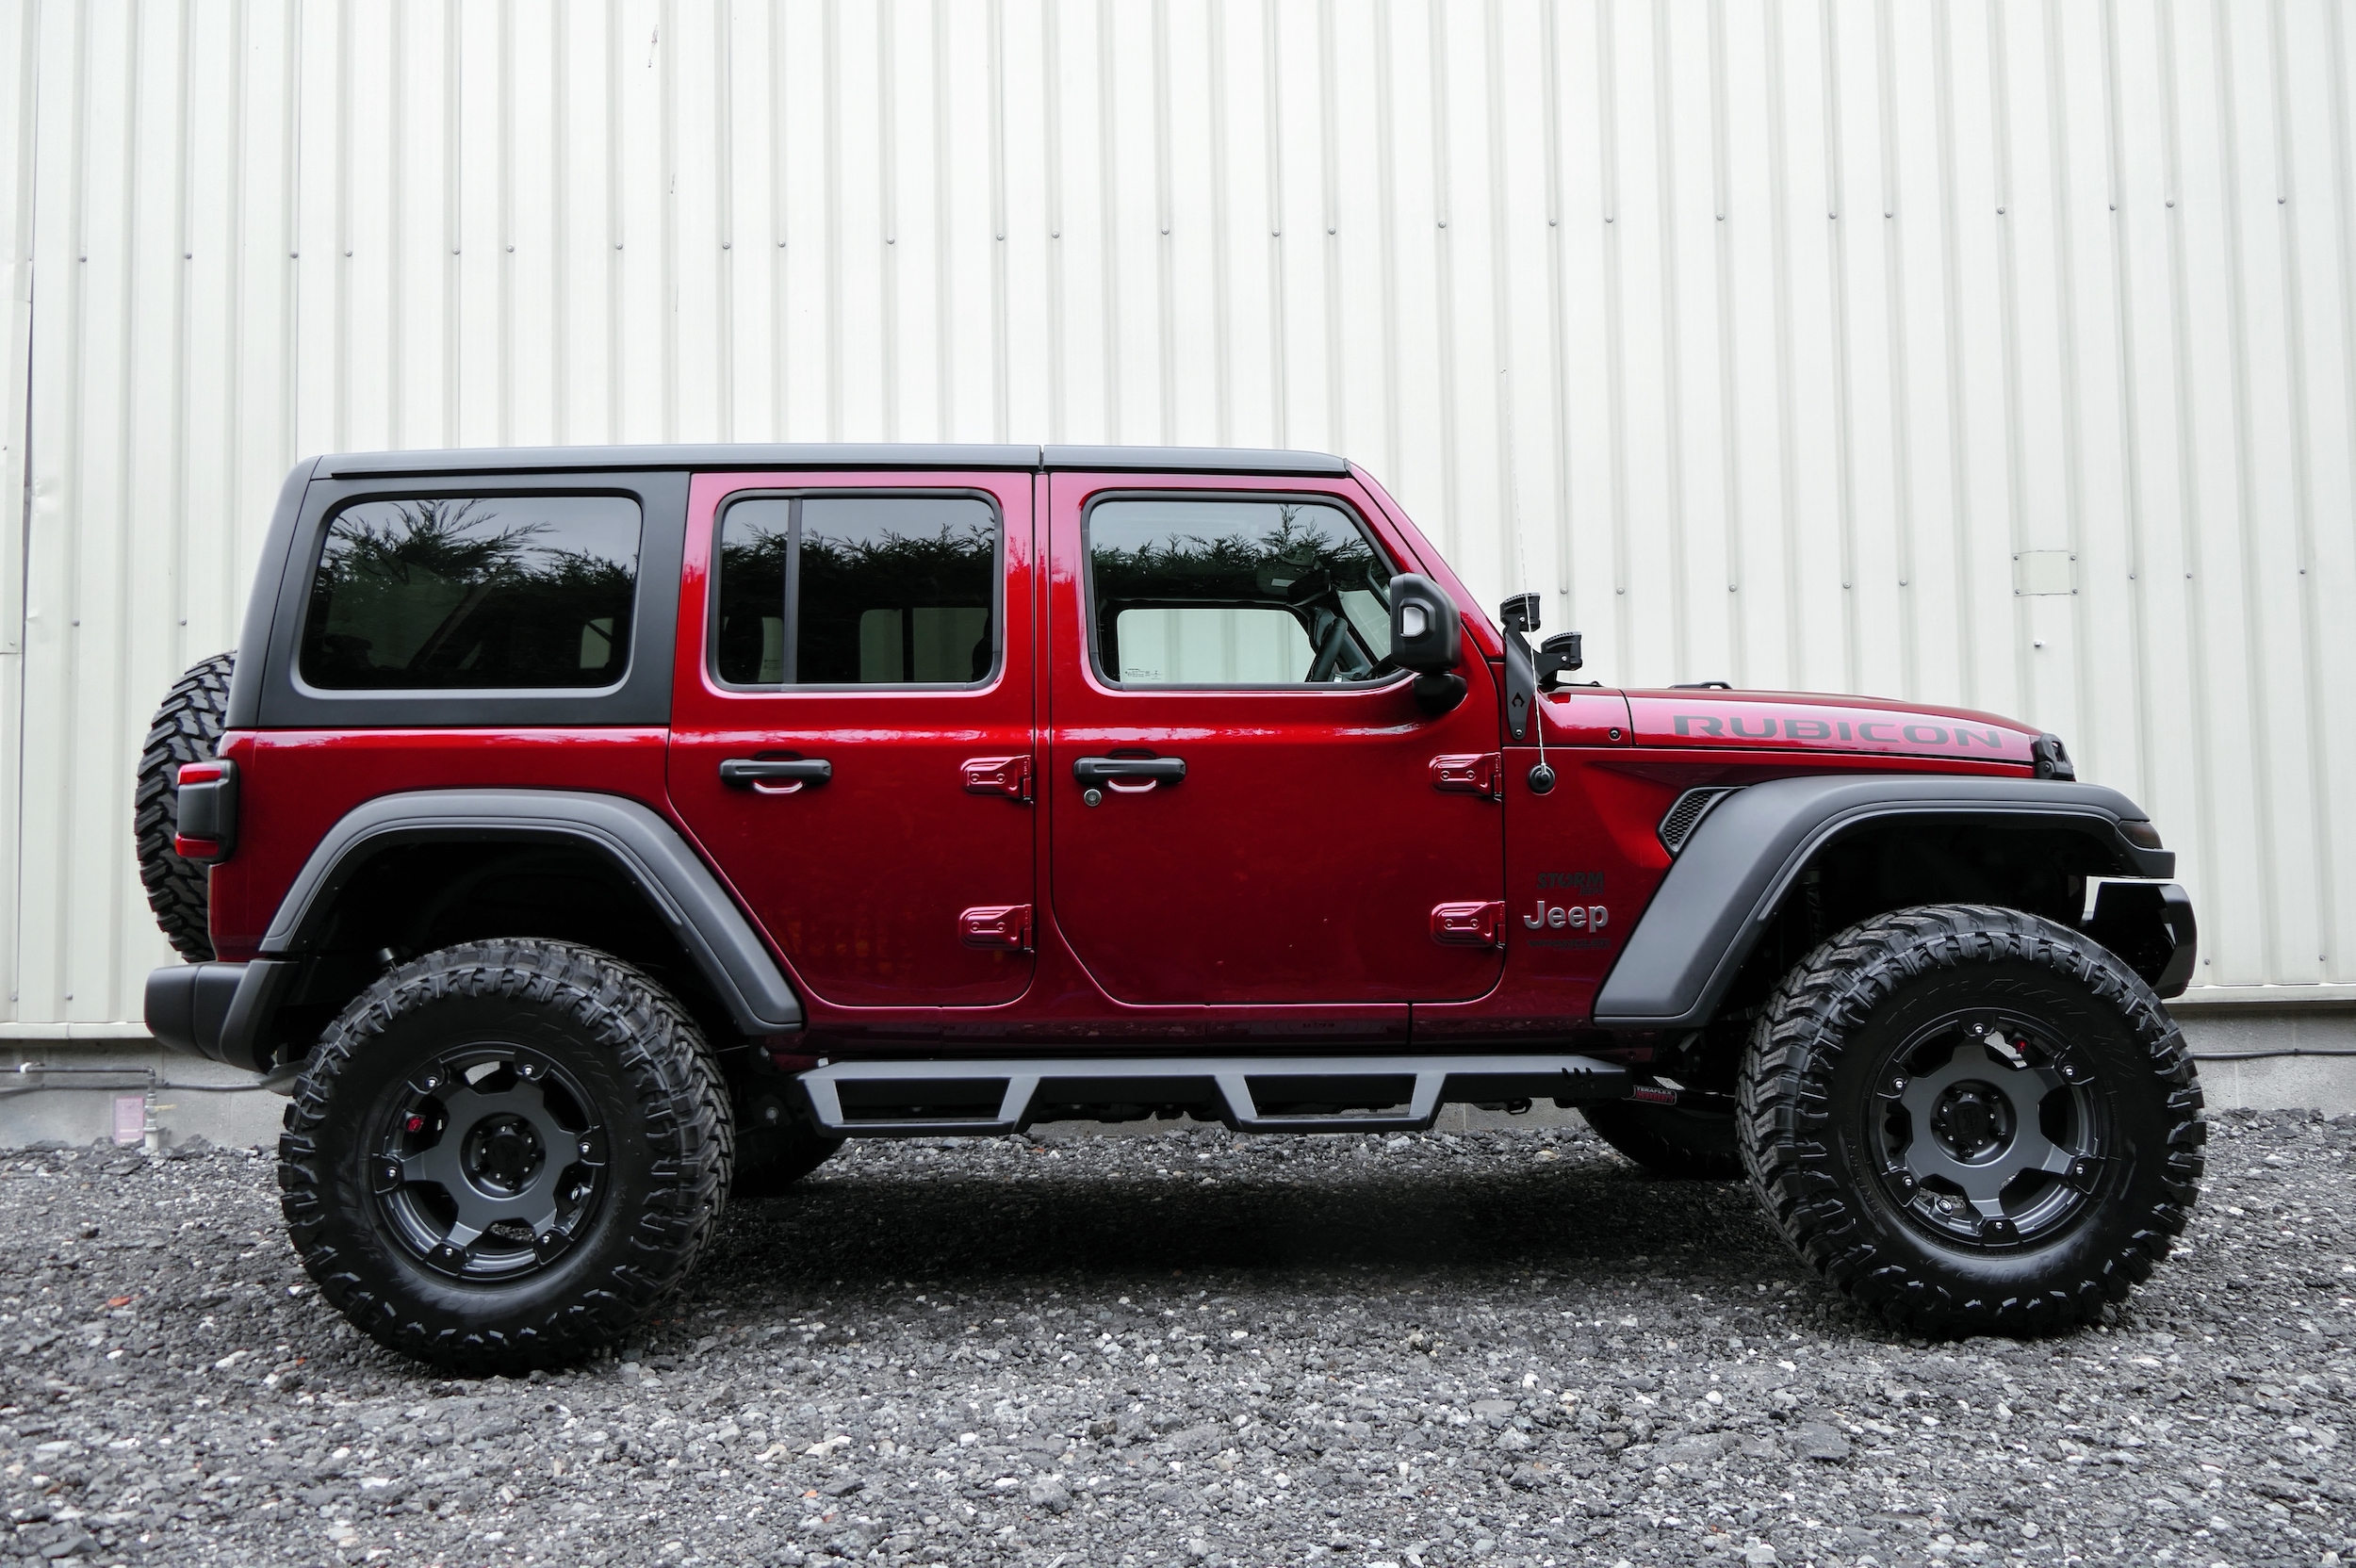 STORM-50, 2021 Snazzberry Red Jeep Rubicon 4 2.0L | Showcase | Storm Jeeps